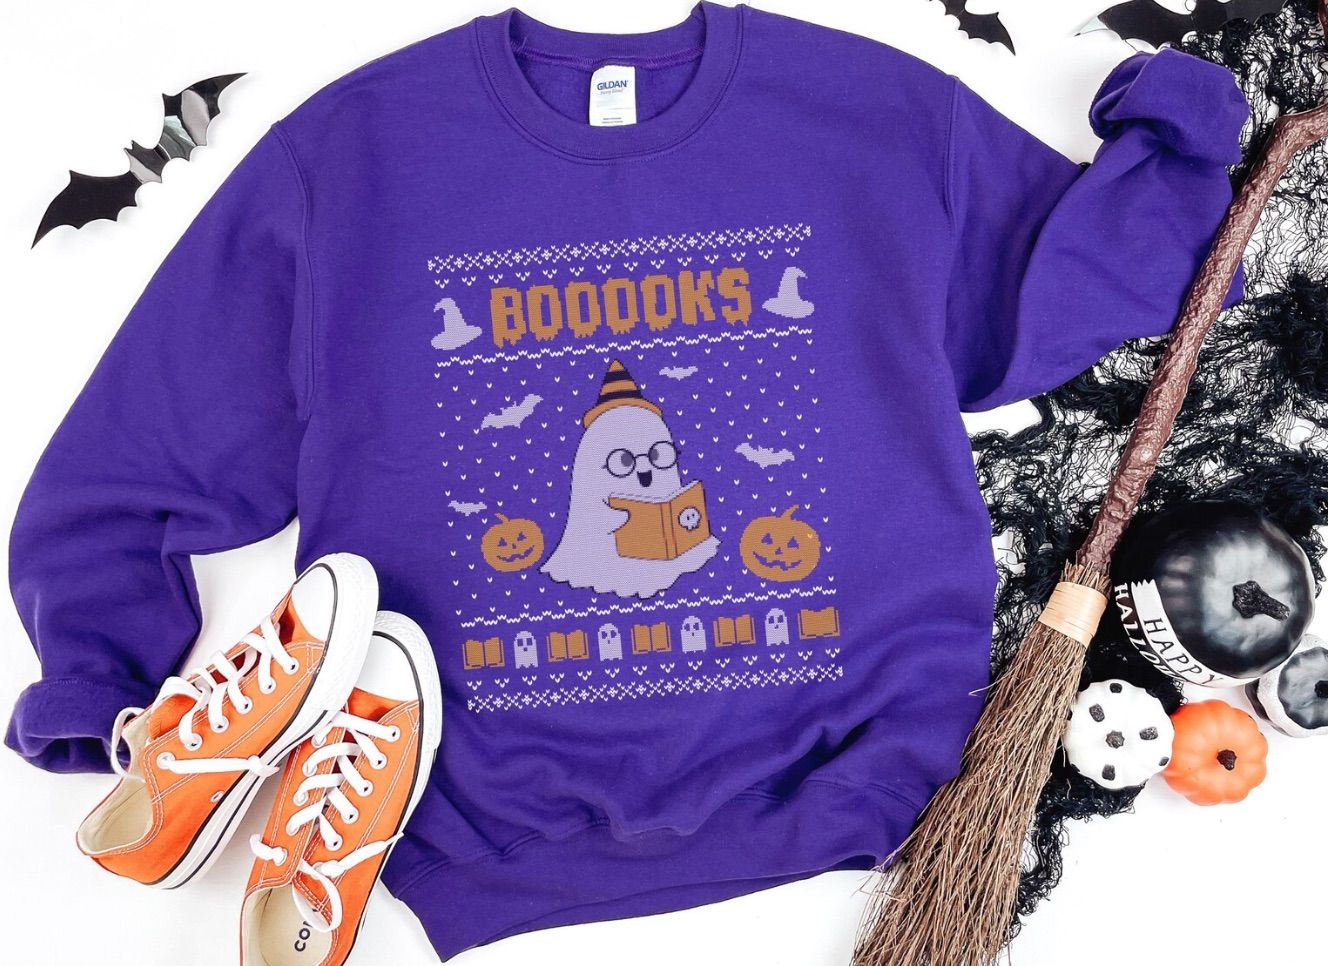 A halloween sweatshirt themed like an ugly Christmas sweater, featuring a ghost reading and the word "booooks."